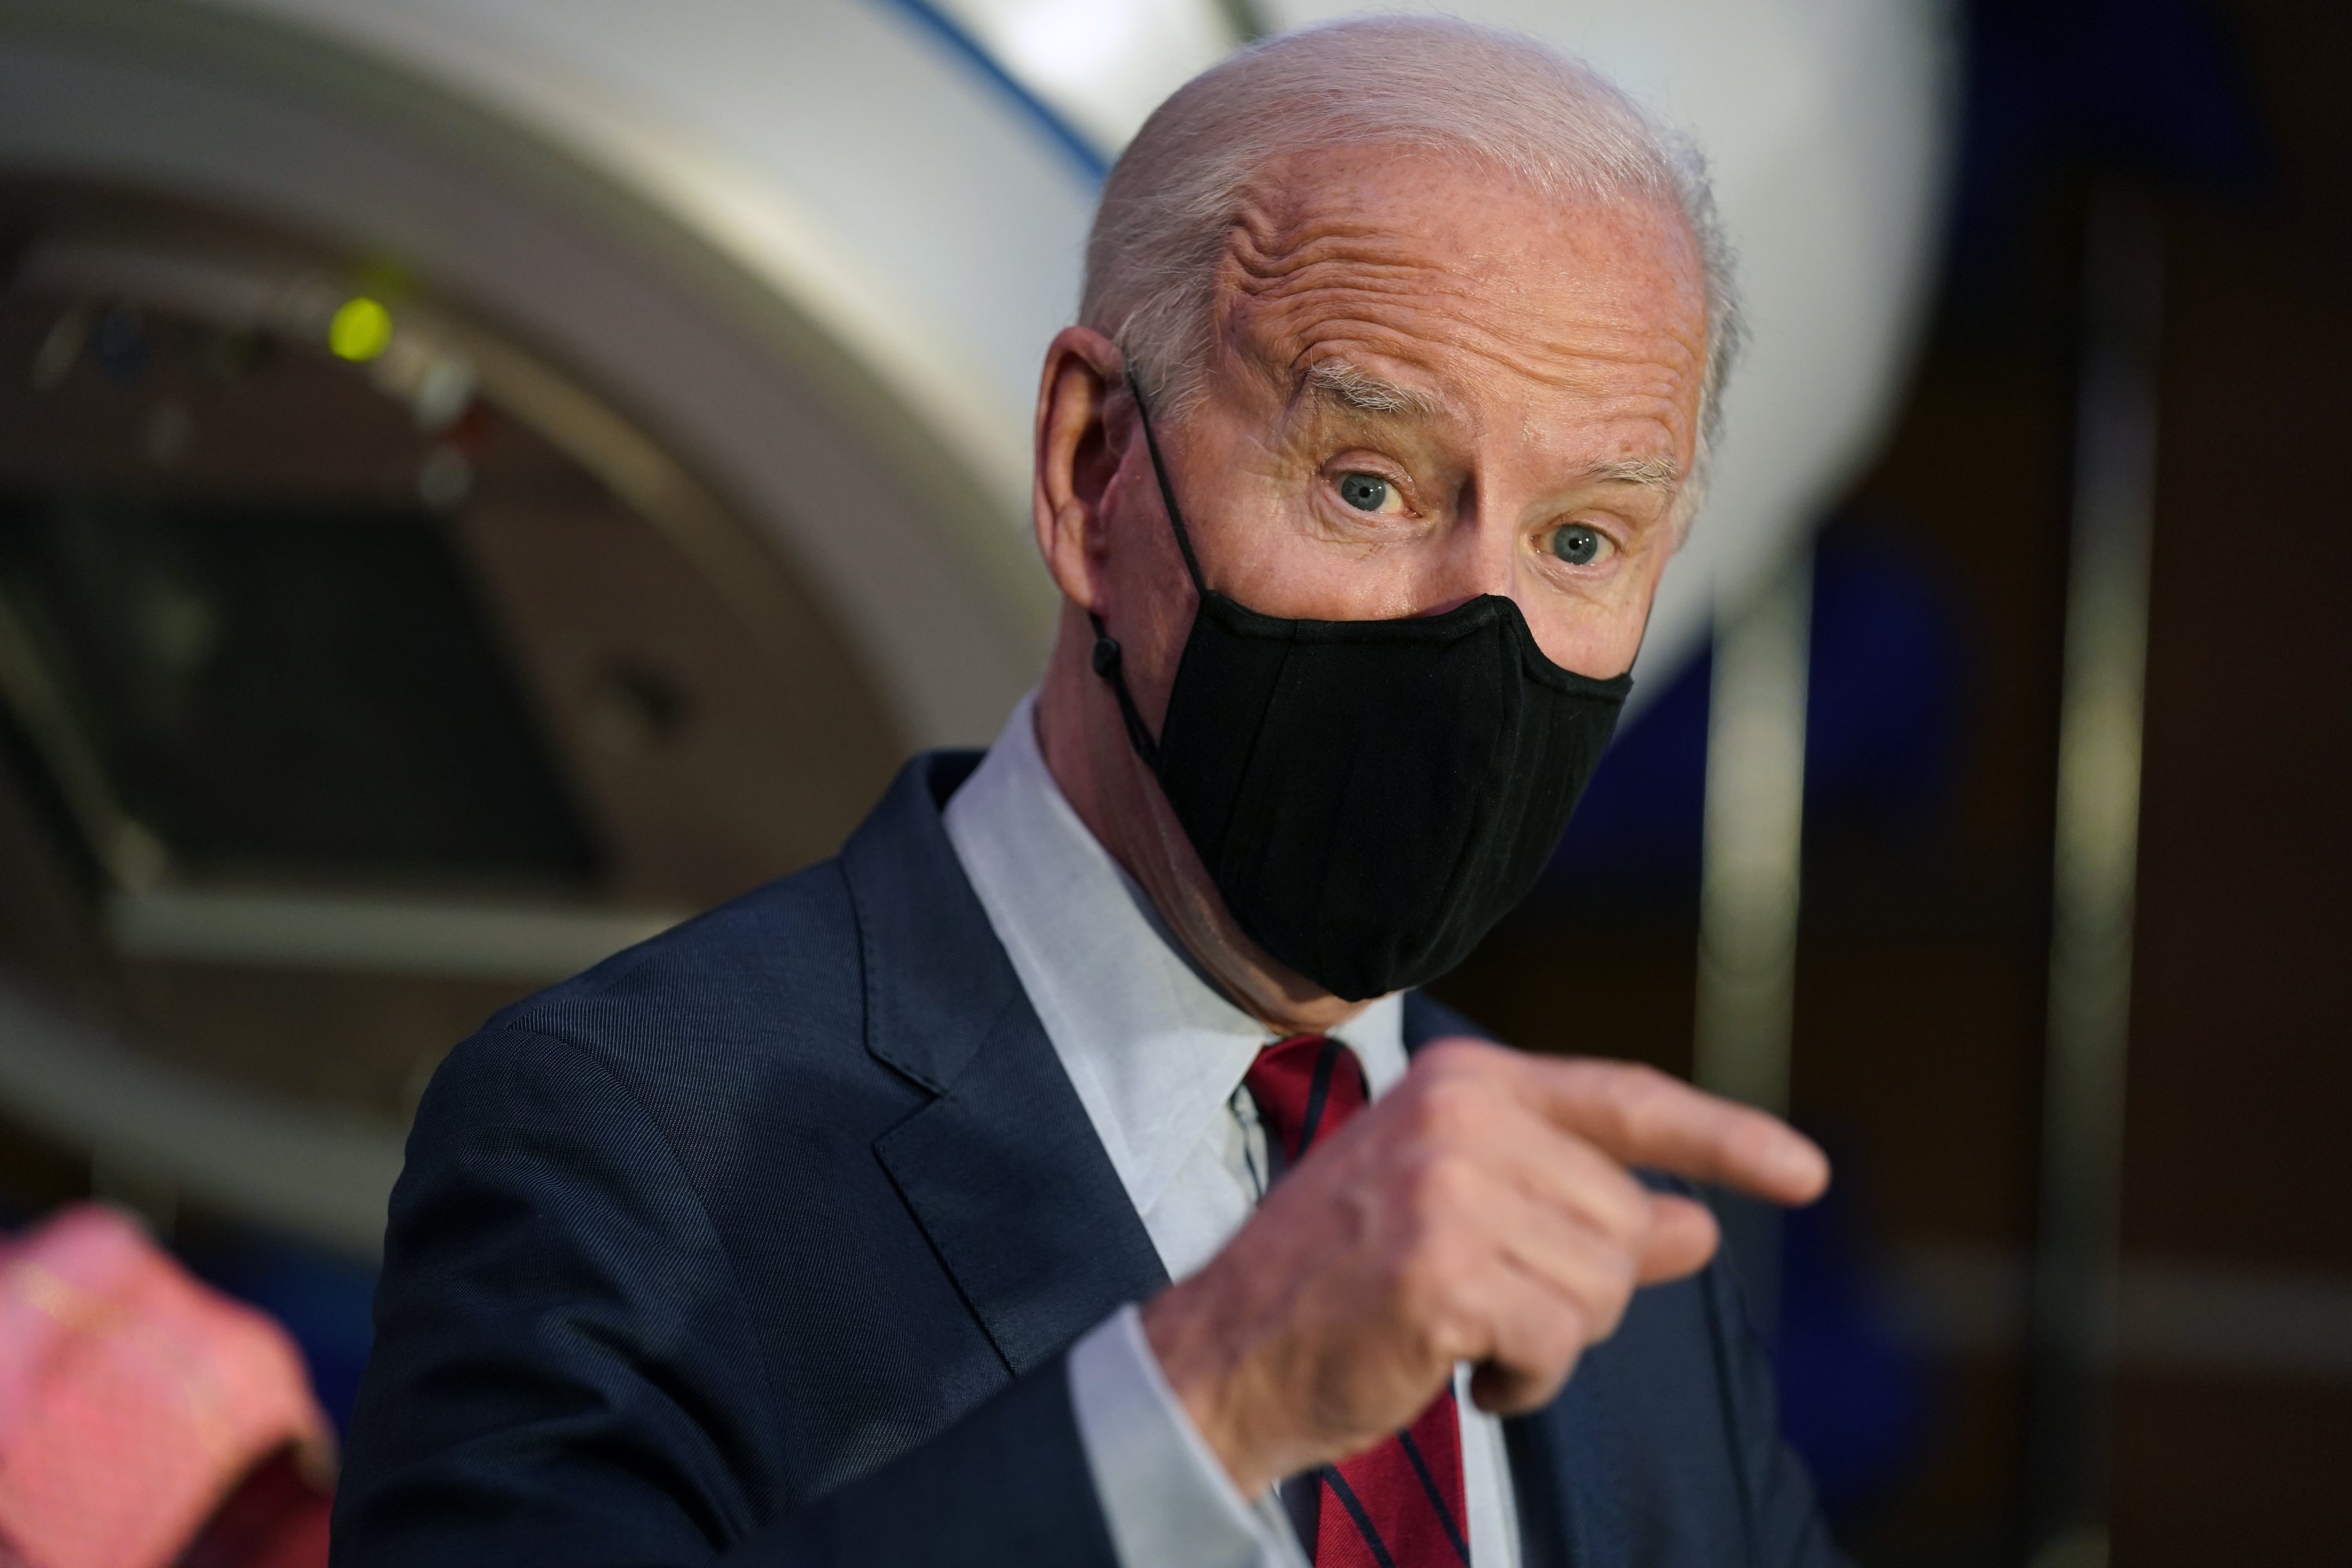 Biden expands ‘Obamacare’ by cutting health insurance costs